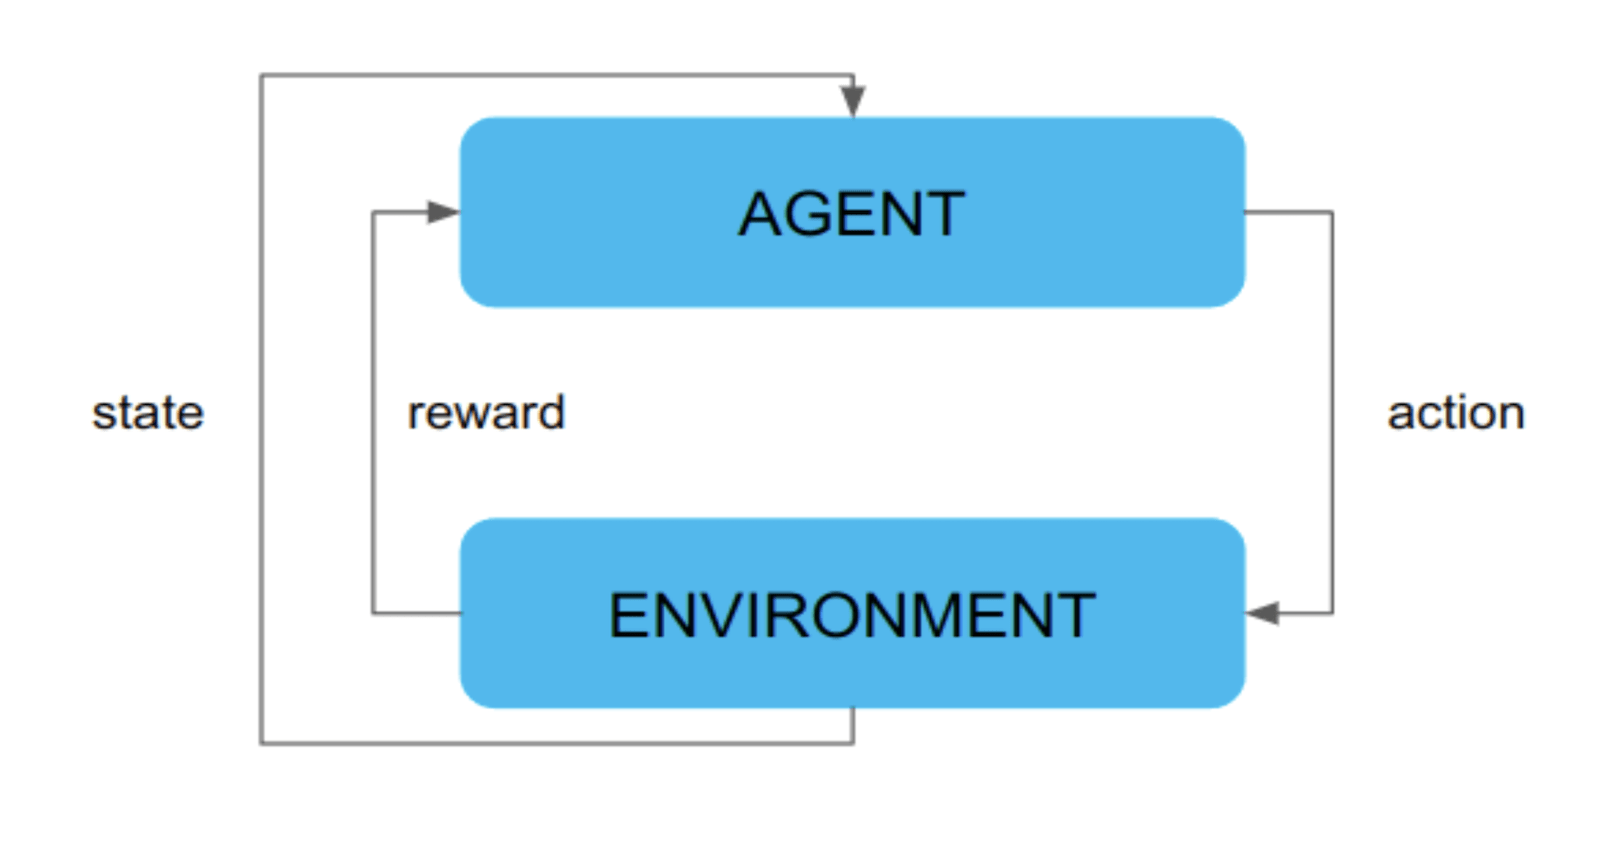 Figure 2: Classic reinforcement learning training loop. Source: own elaboration